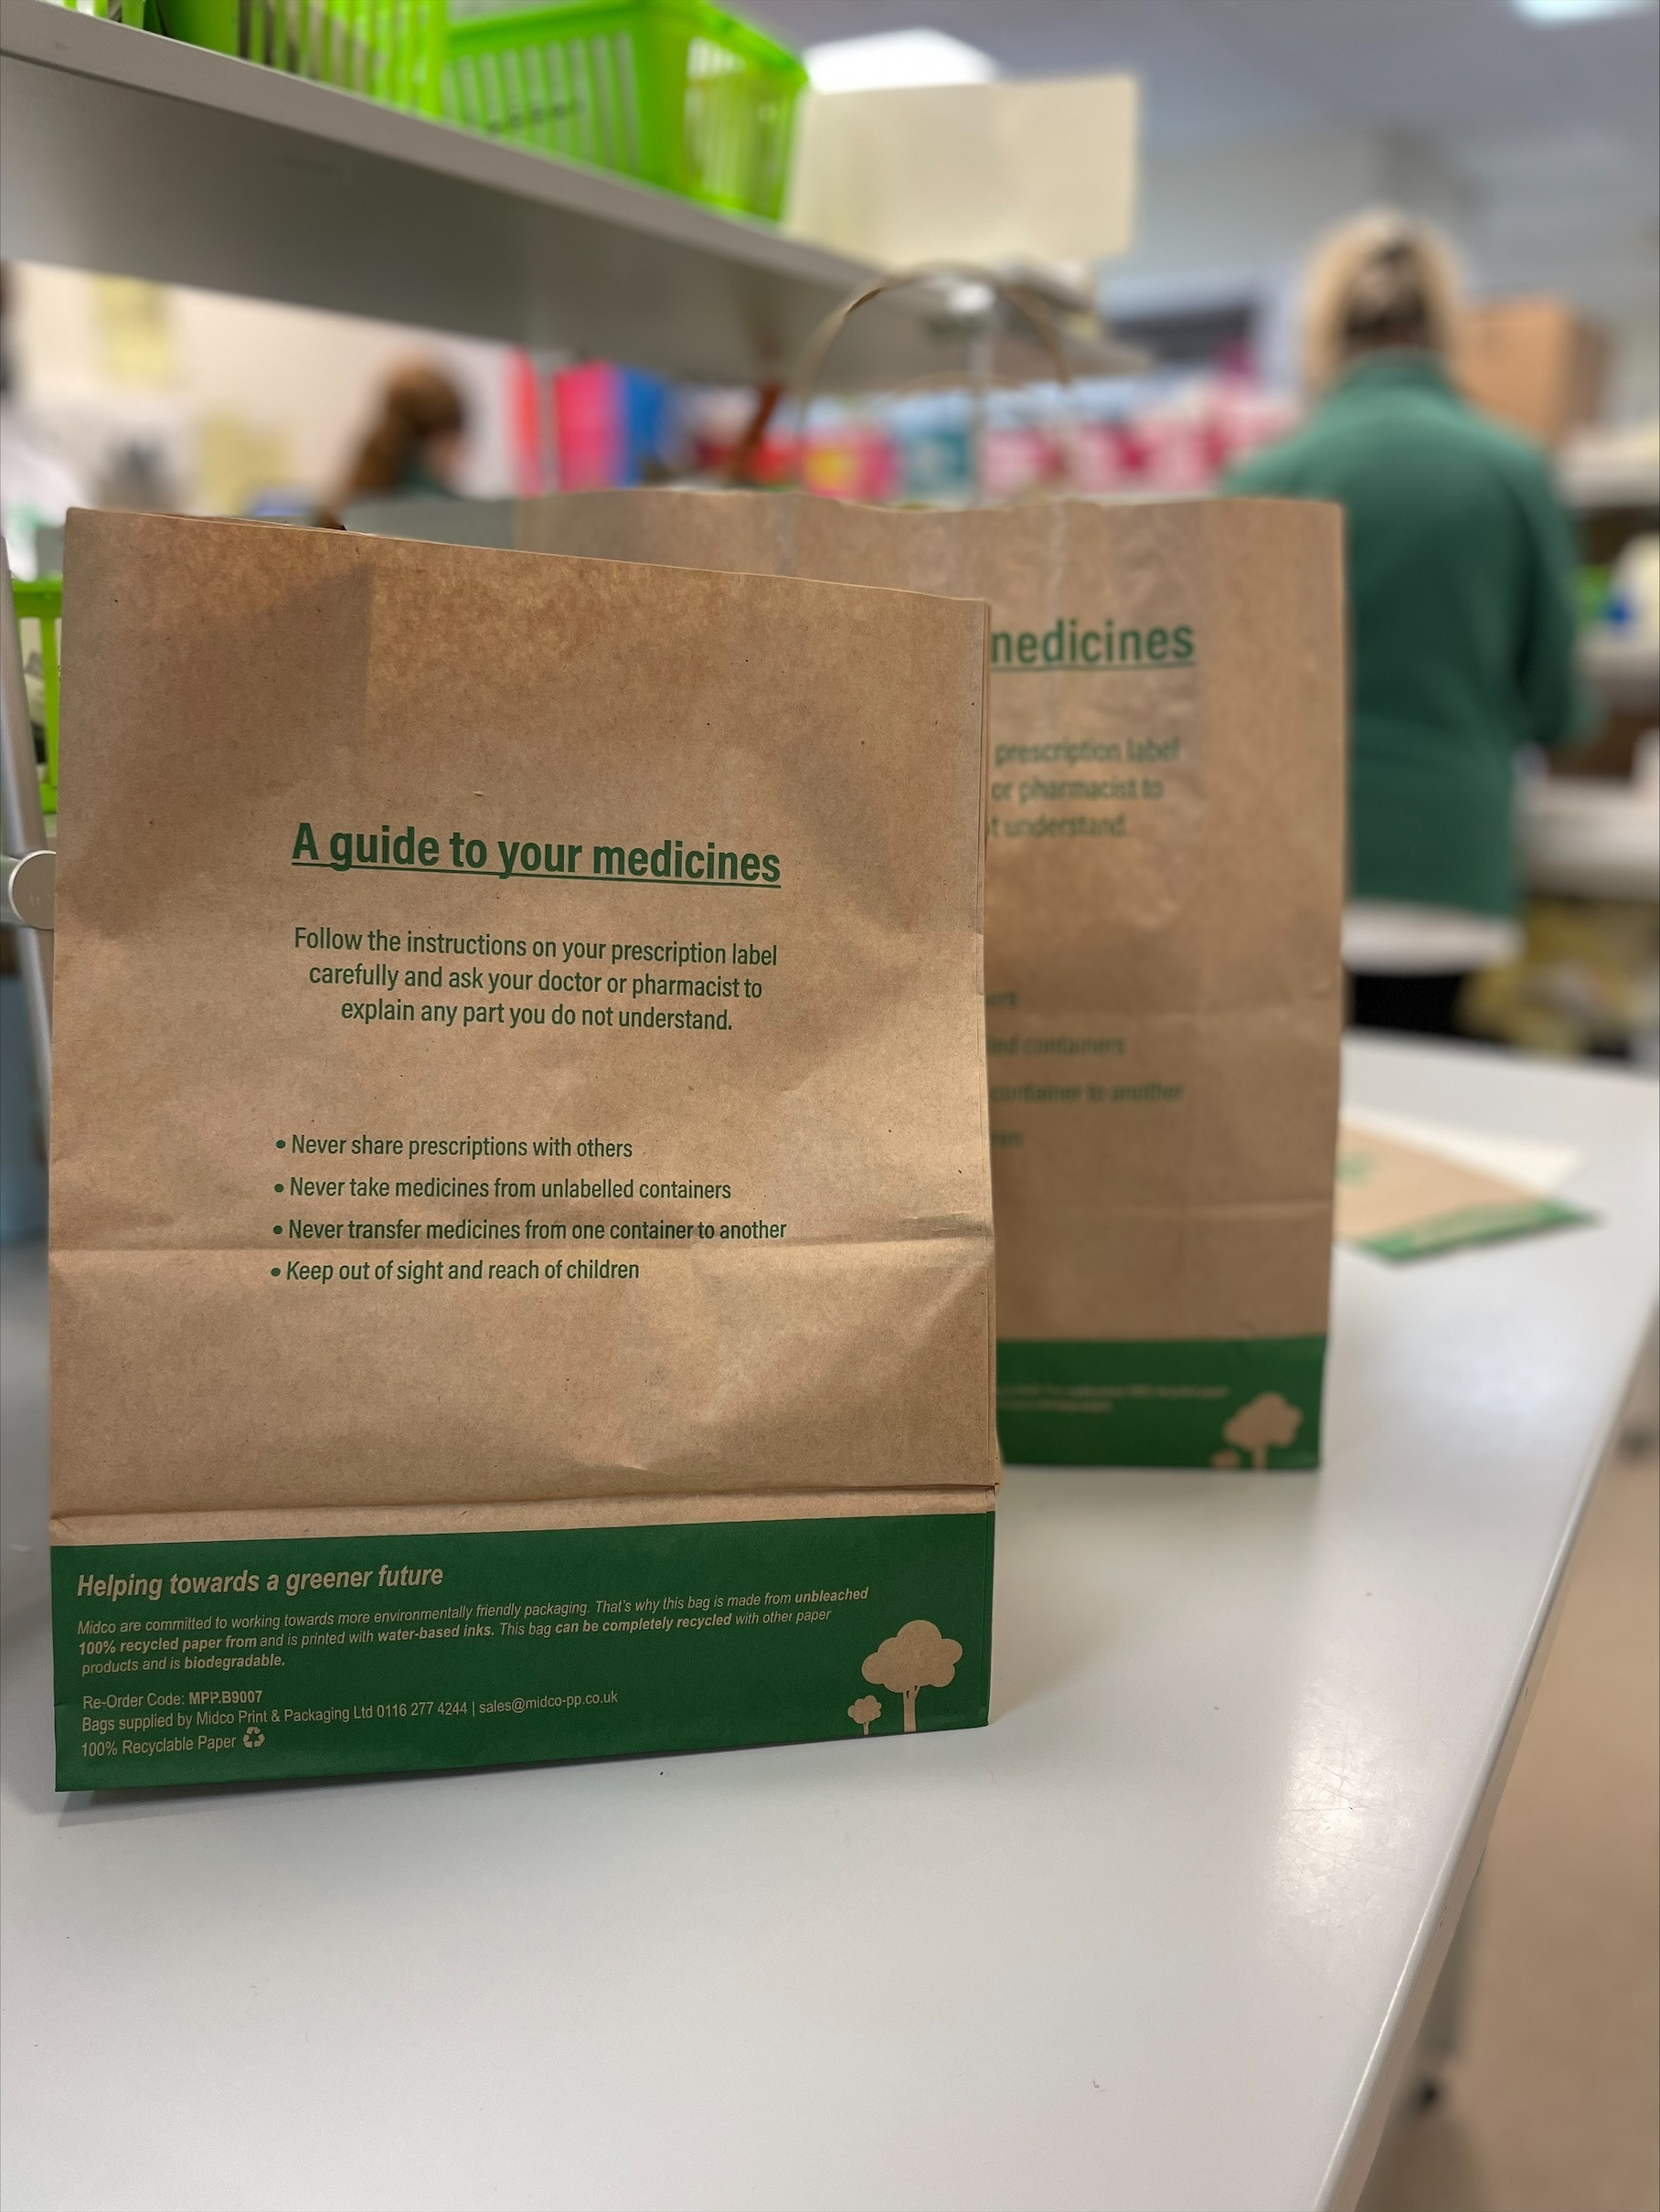 Paper bags, used in pharmacy instead of plastic bags. Image shows two brown paper bags with green writing on, on the counter in the pharmacy department. Staff can be seen in the background working.